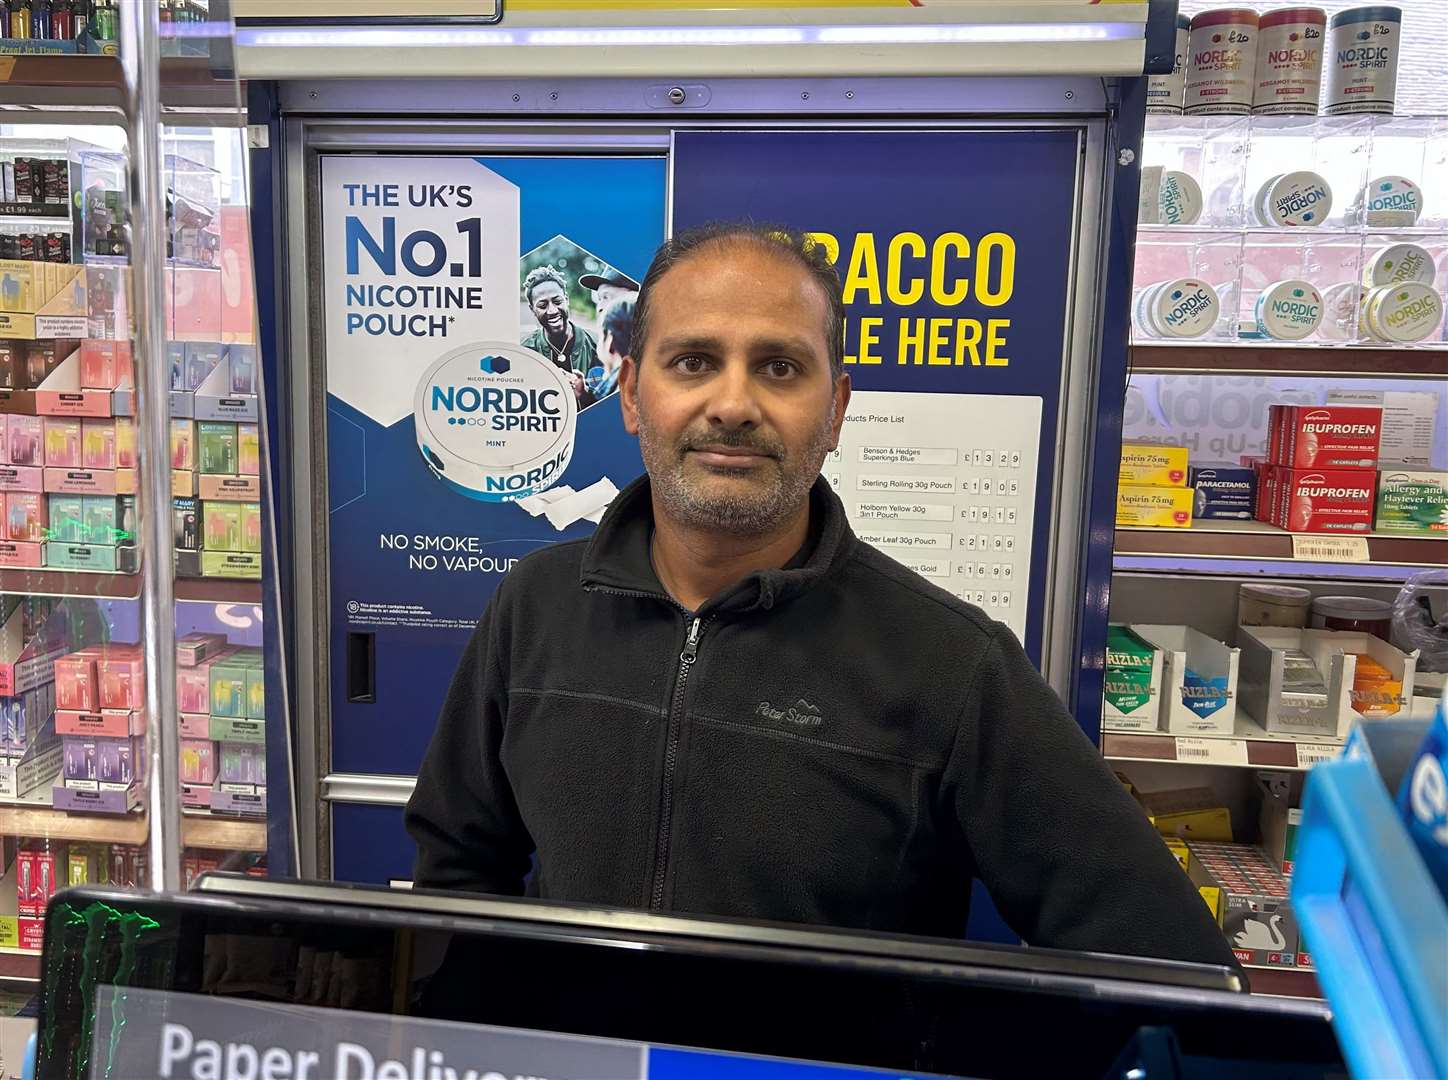 Dee Patel, who runs newsagent Bonbon, has lost between £400 and £500 a day due to the Wincheap gas works